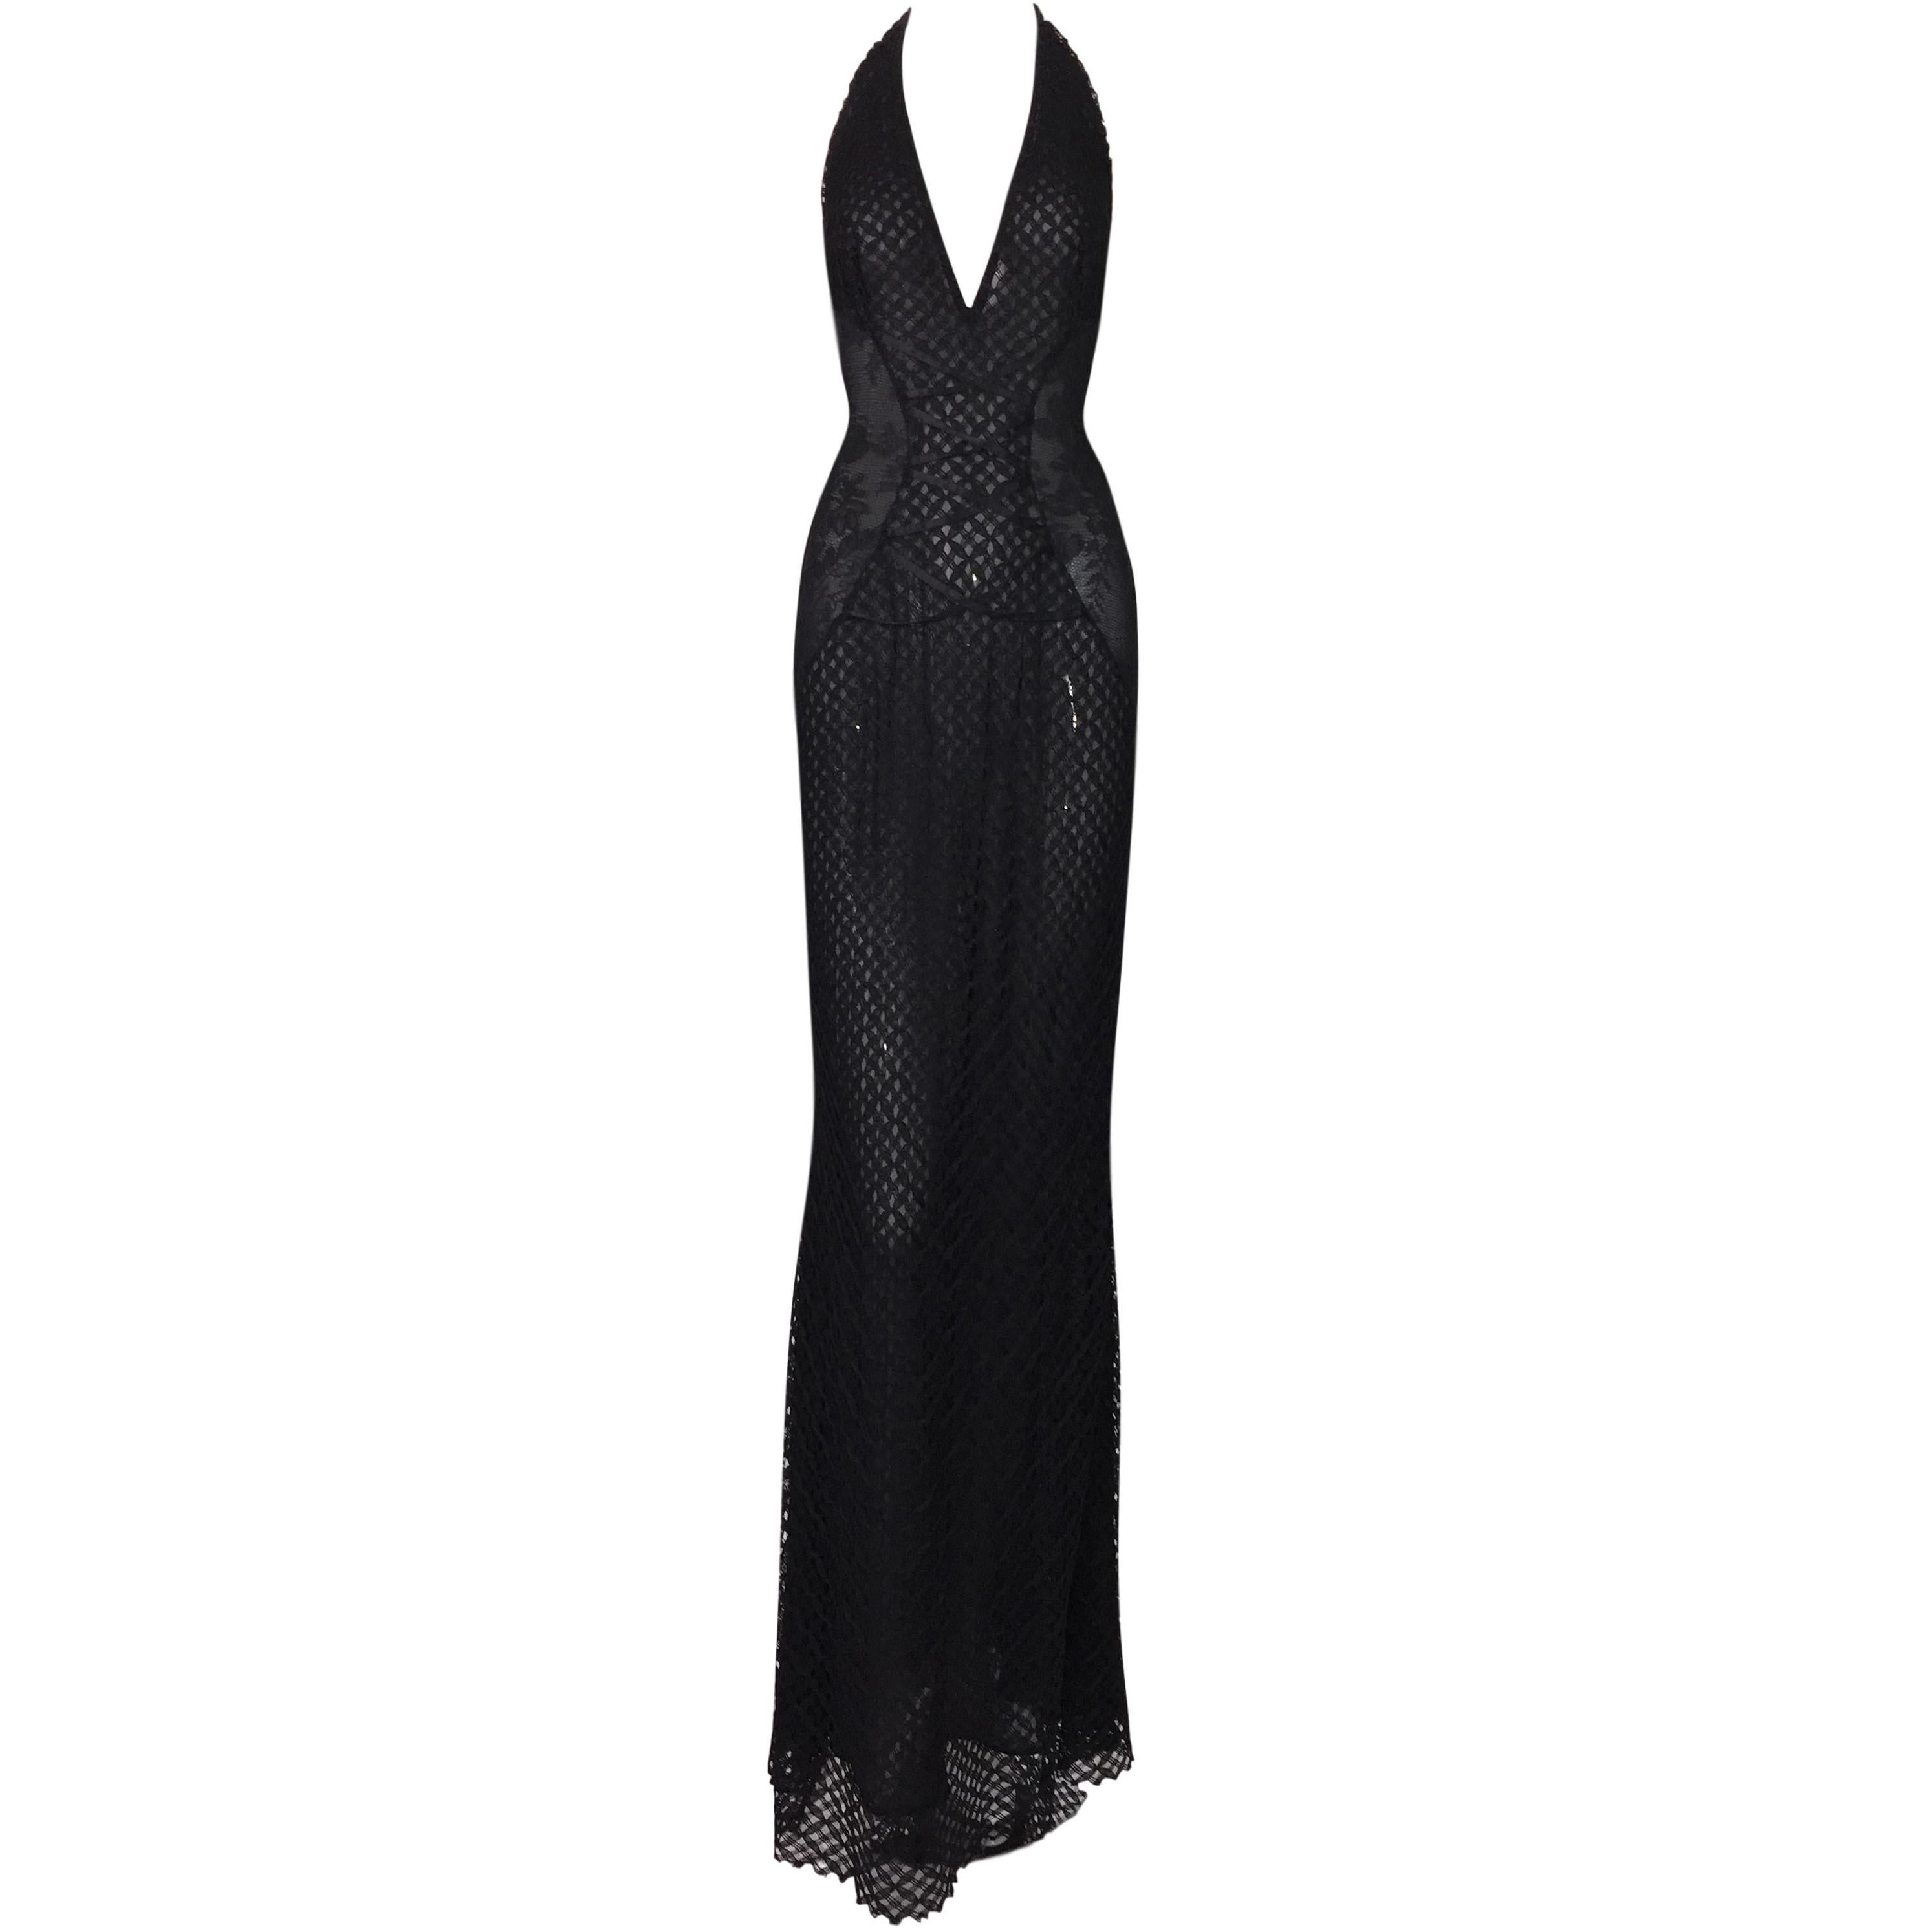 S/S 2002 Gianni Versace Sheer Black Lace Plunging Backless Halter Gown Dress